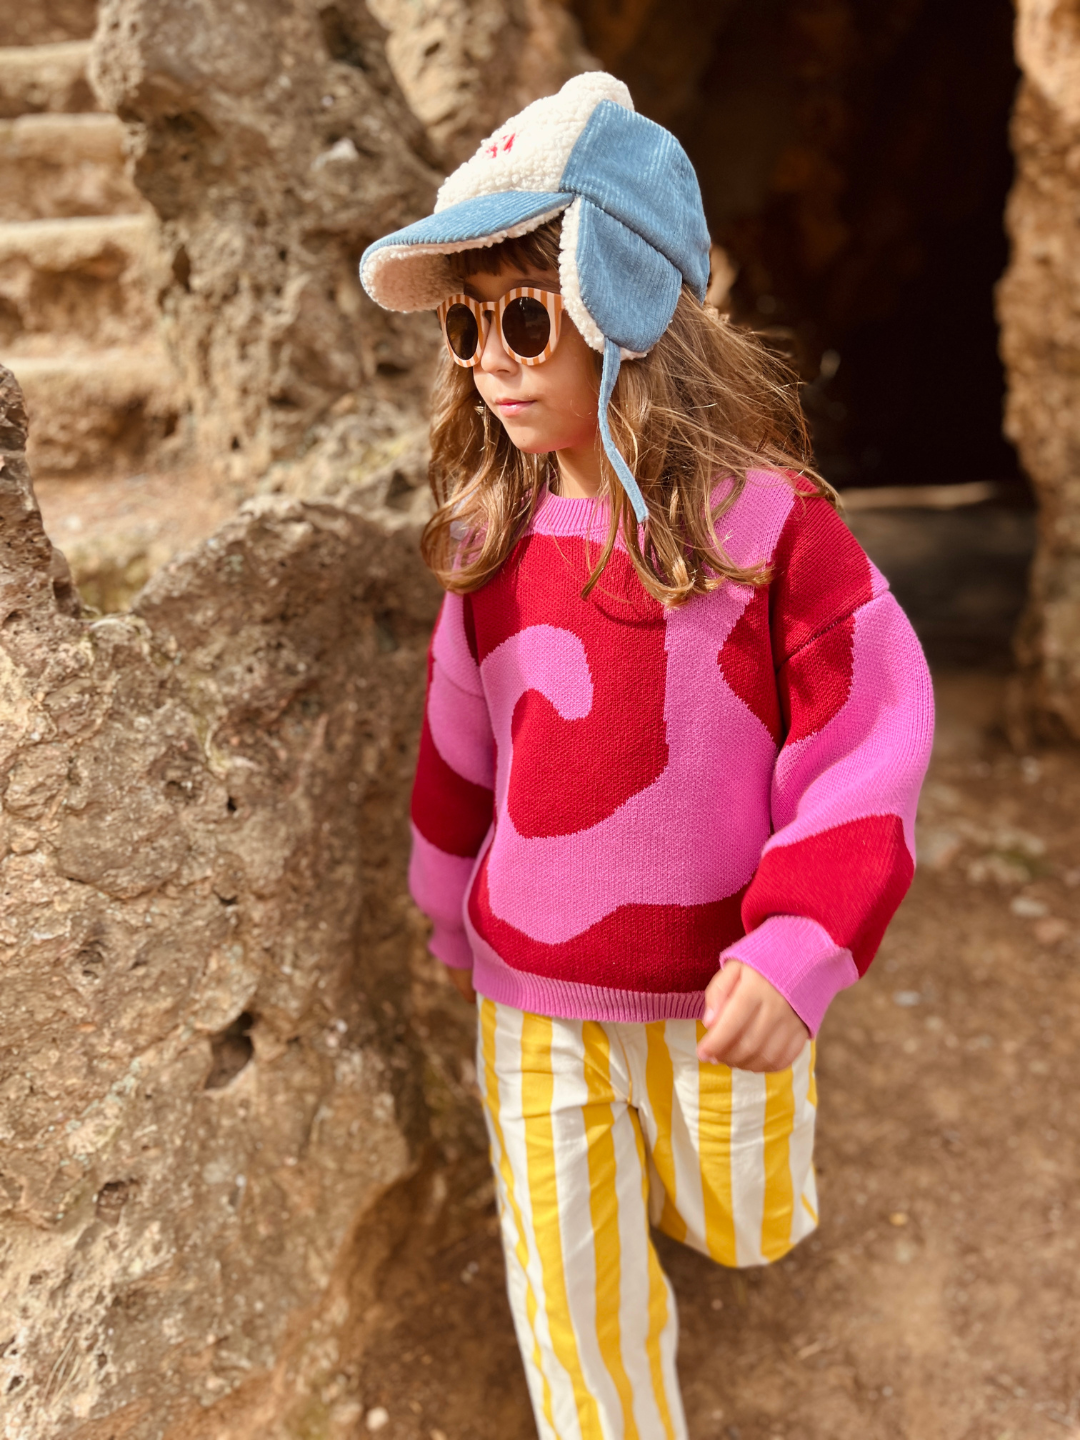 A girl wearing a kids crewneck sweater in bright pink, with a large single red swirl design that covers the entire sweater. She is is walking in front of a brown stone wall, and also wears yellow-and-white vertical striped pants, a blue cap with ear flats, and rust and white striped sunglasses.